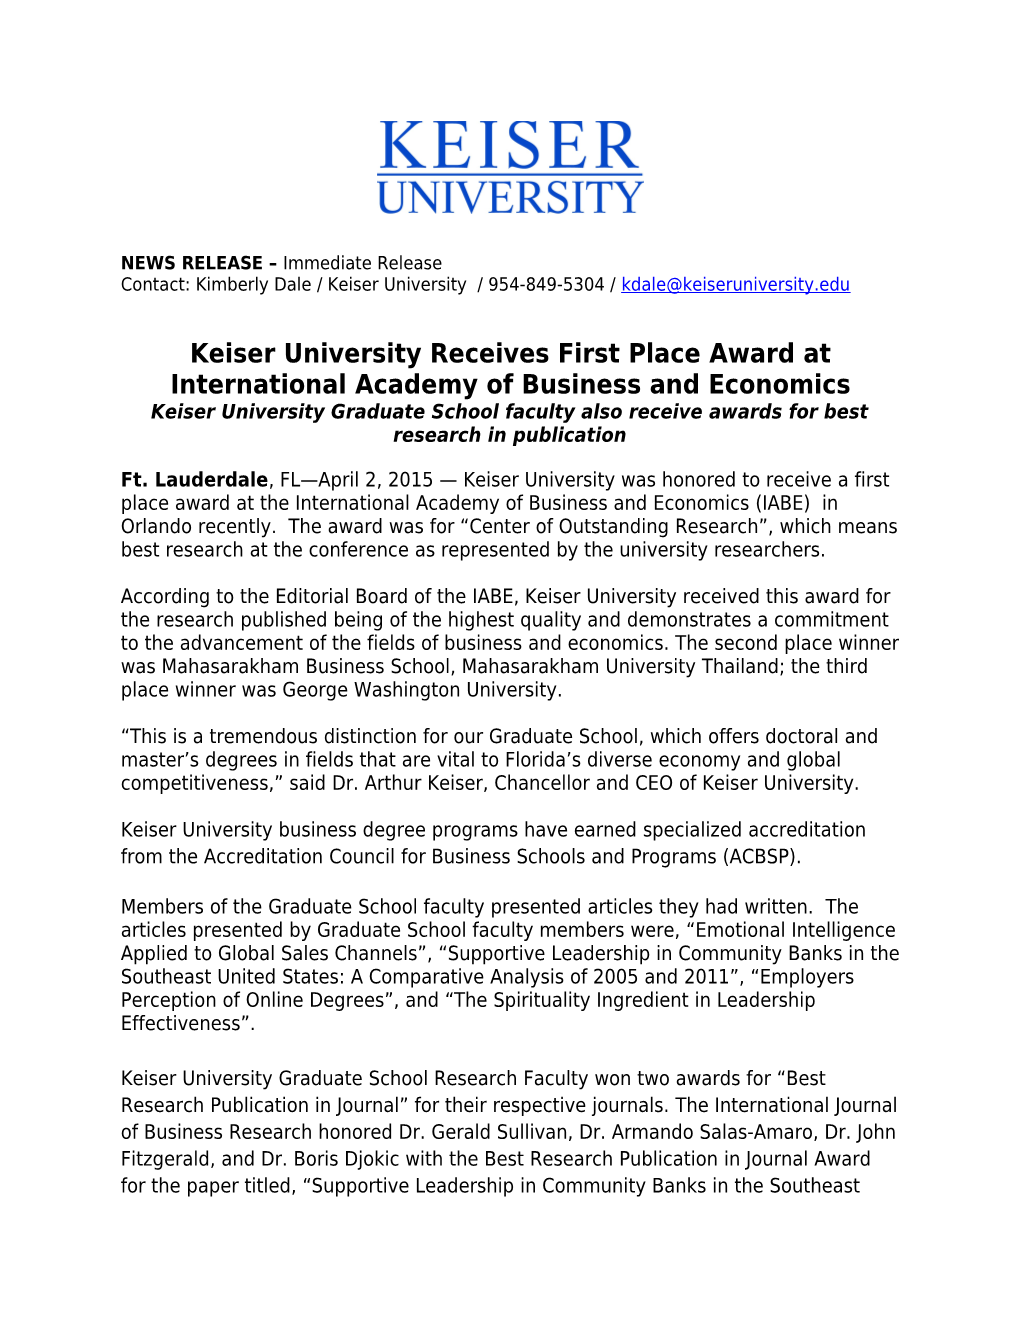 Keiser Universityreceives First Place Award at International Academy of Business and Economics